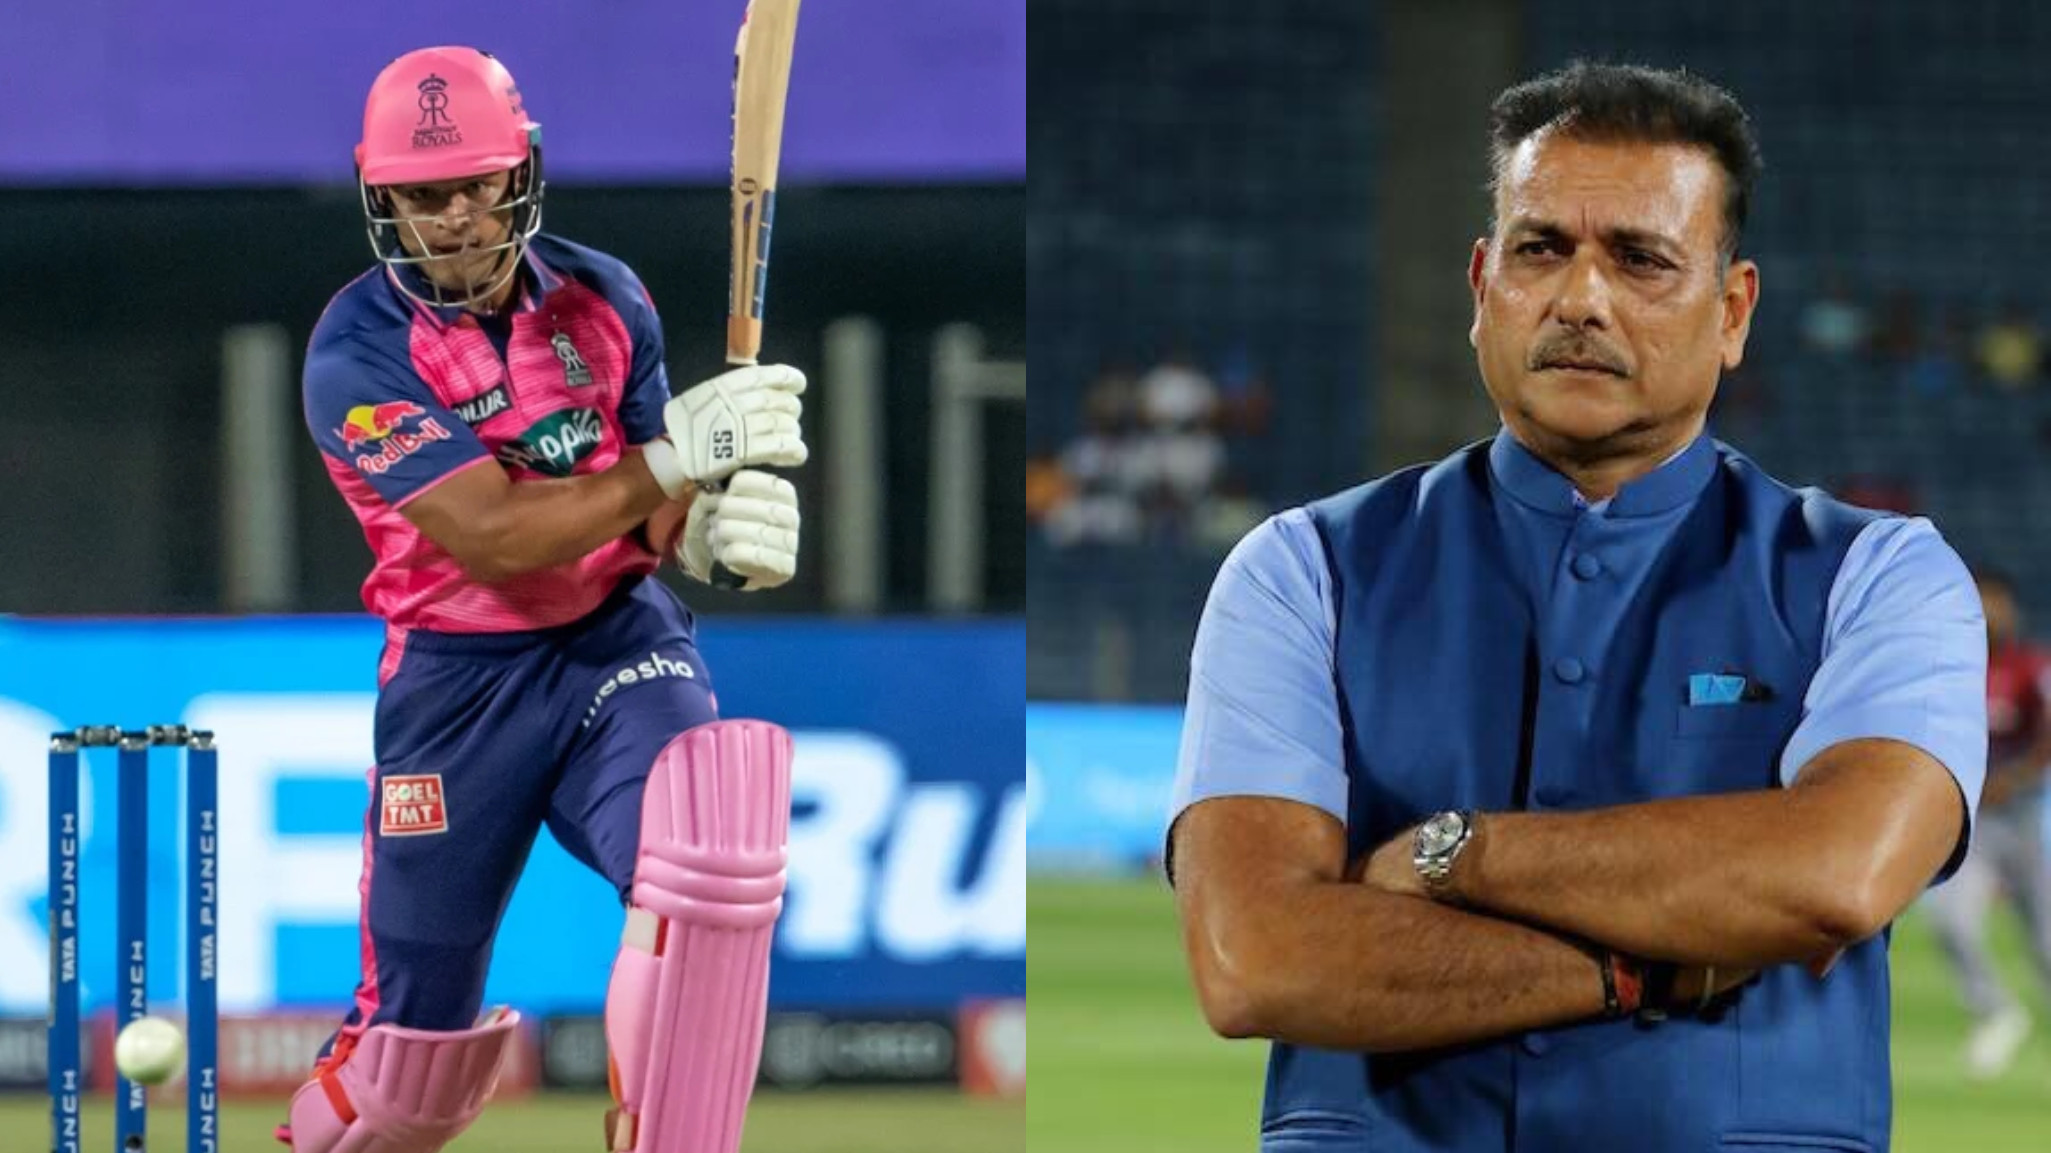 IPL 2023: “You are asking for trouble”- Ravi Shastri makes strong remarks on Riyan Parag’s poor batting against LSG